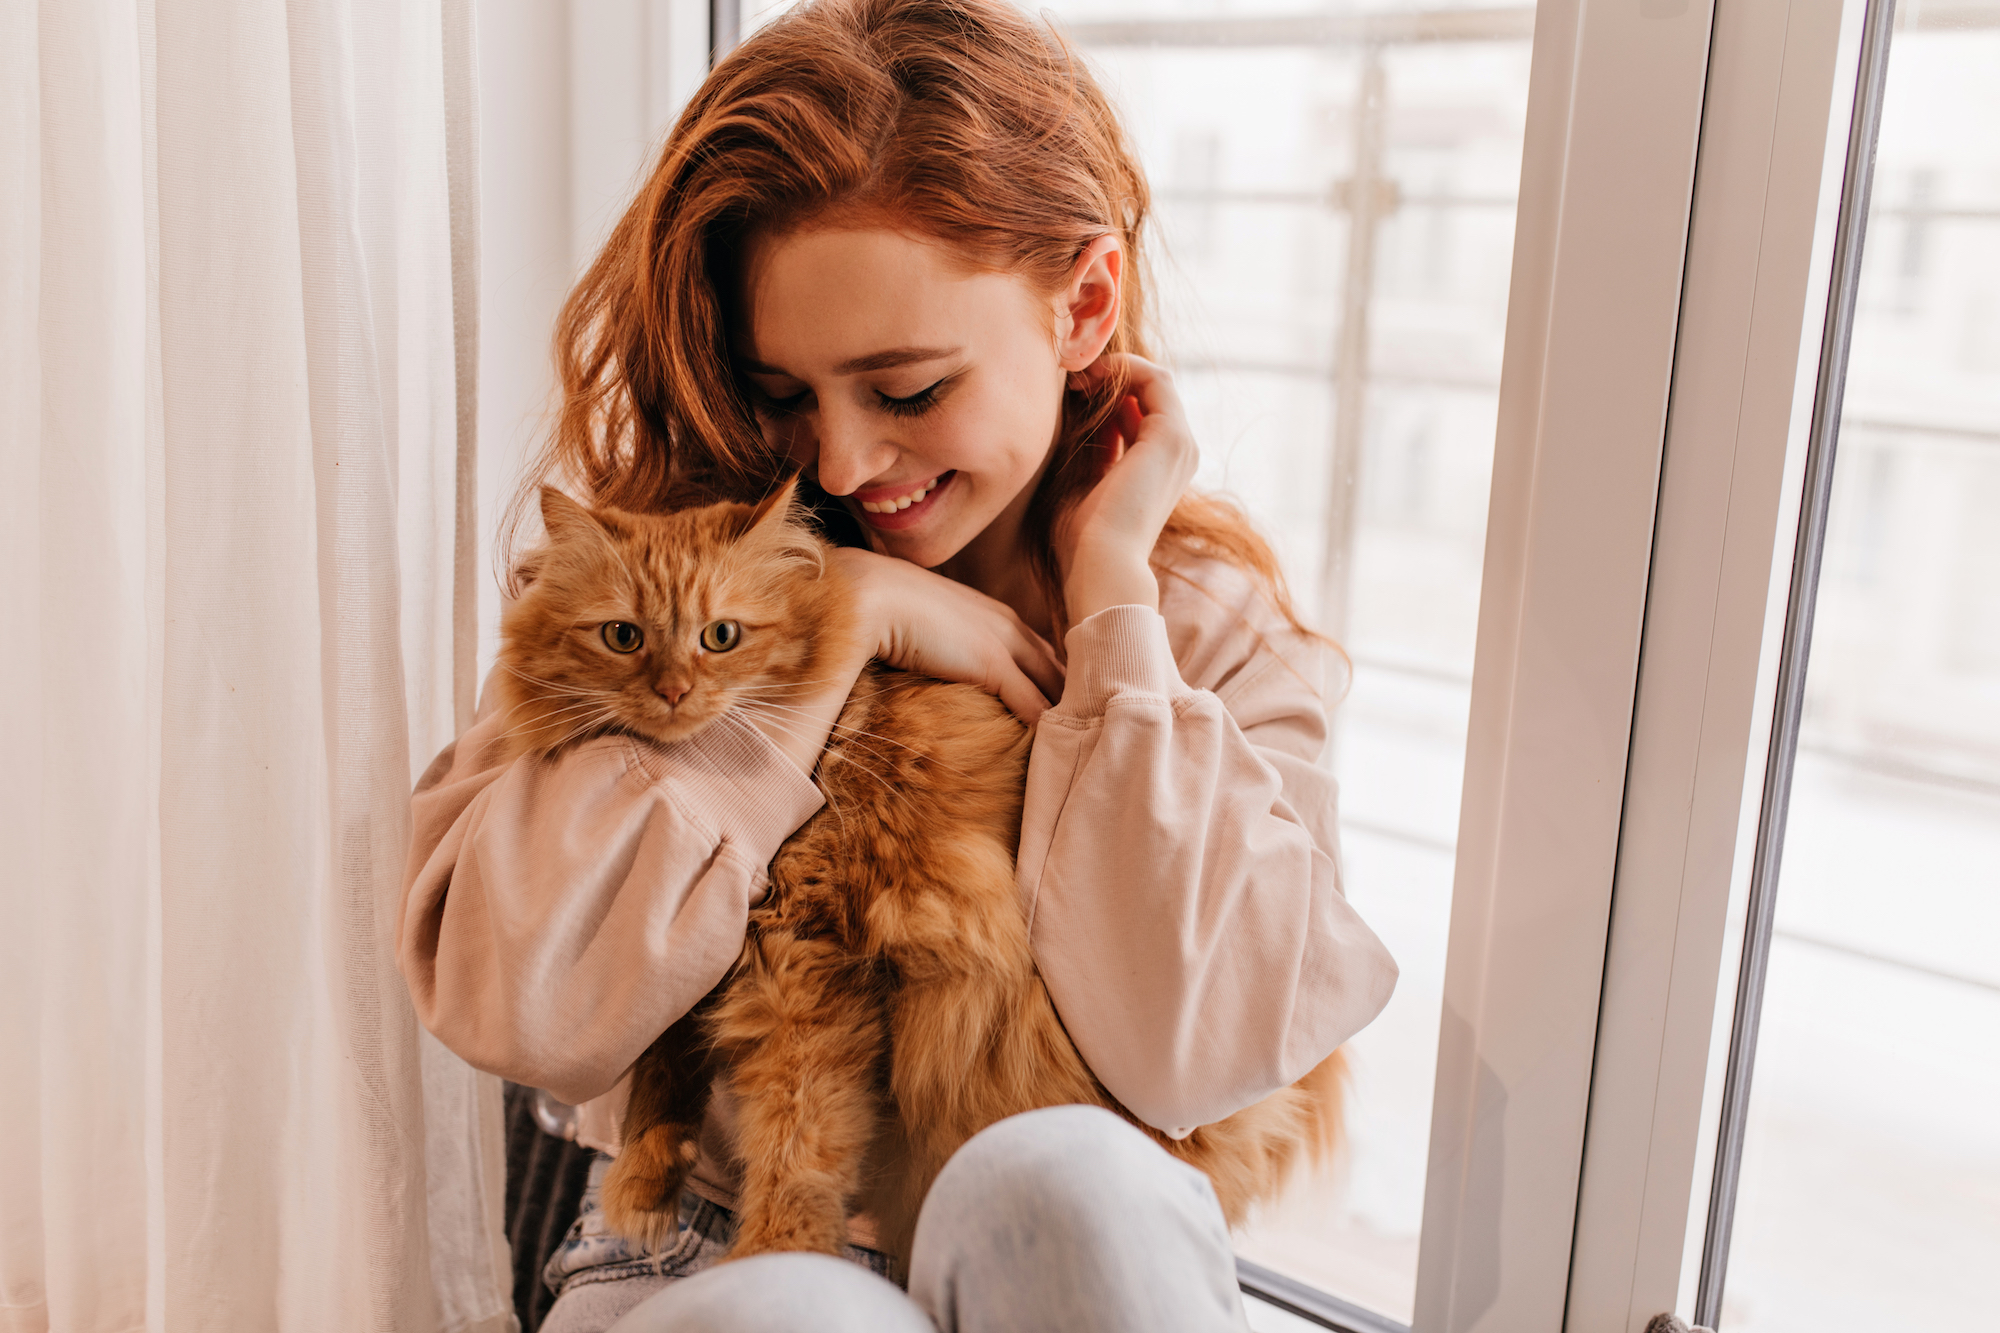 relaxed-smiling-girl-playing-with-her-fluffy-cat-indoor-shot-amazing-lady-holding-pet.jpg